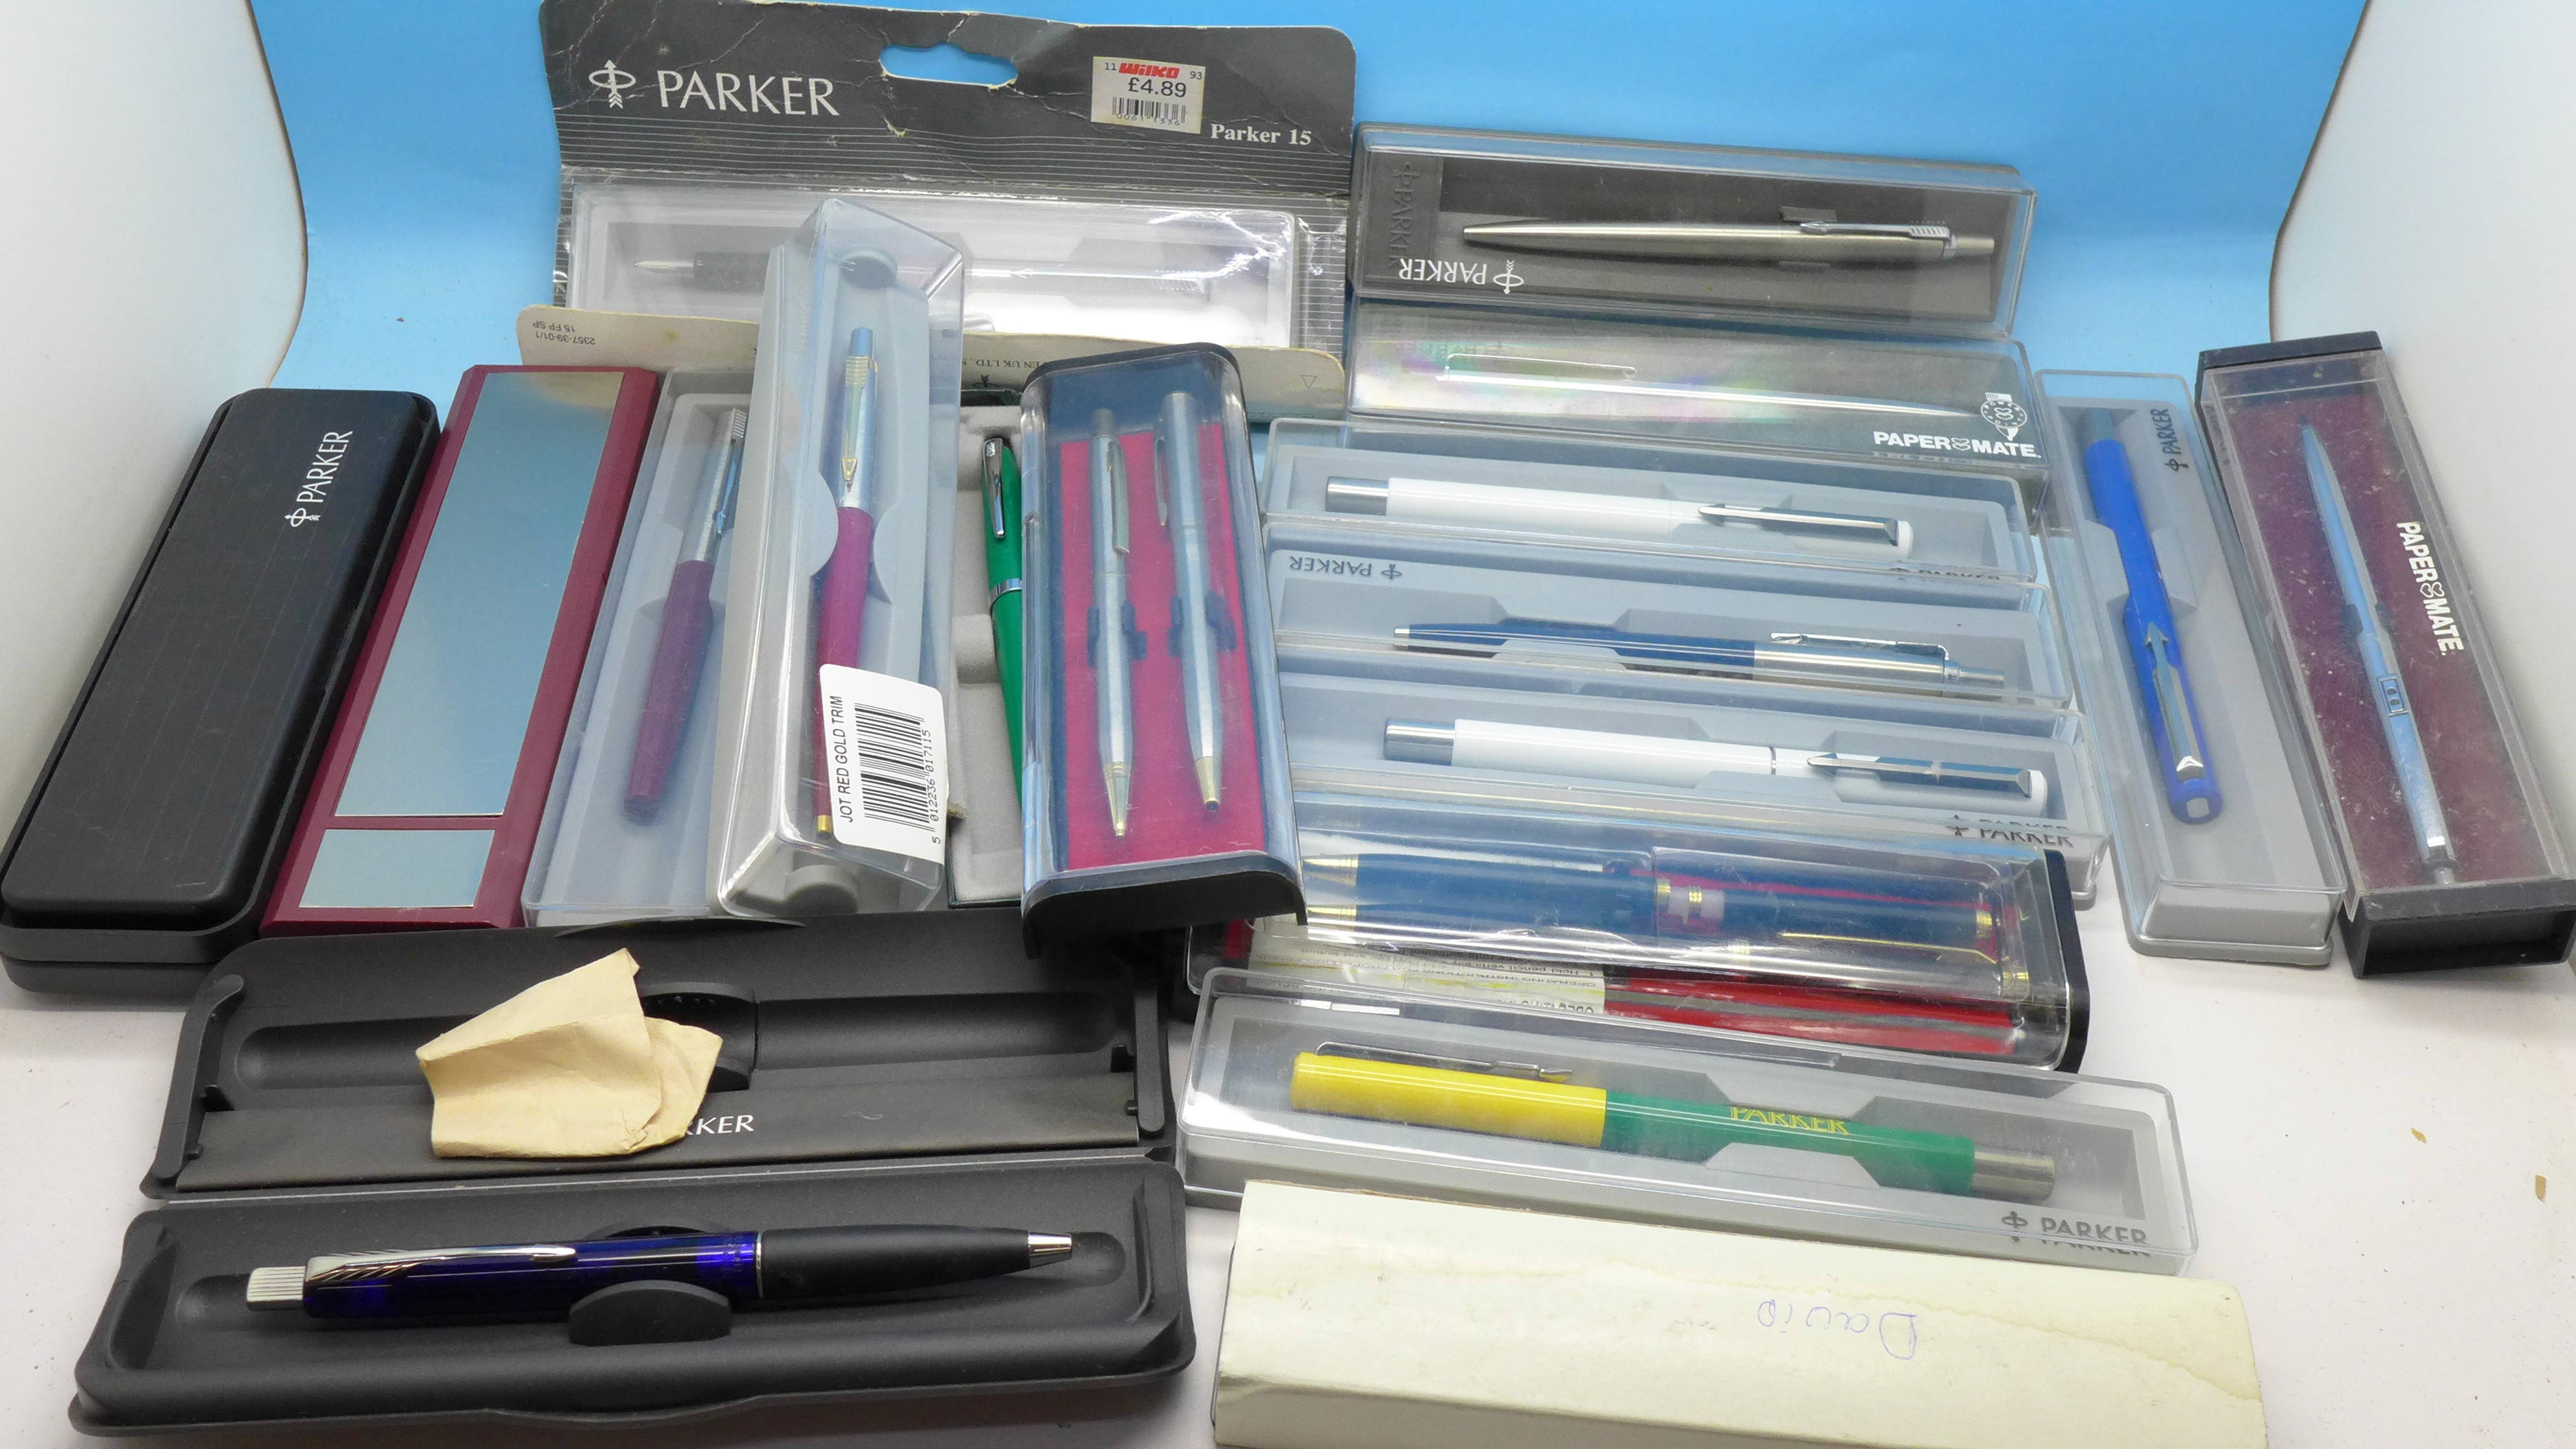 A collection of pens including Parker and Cross